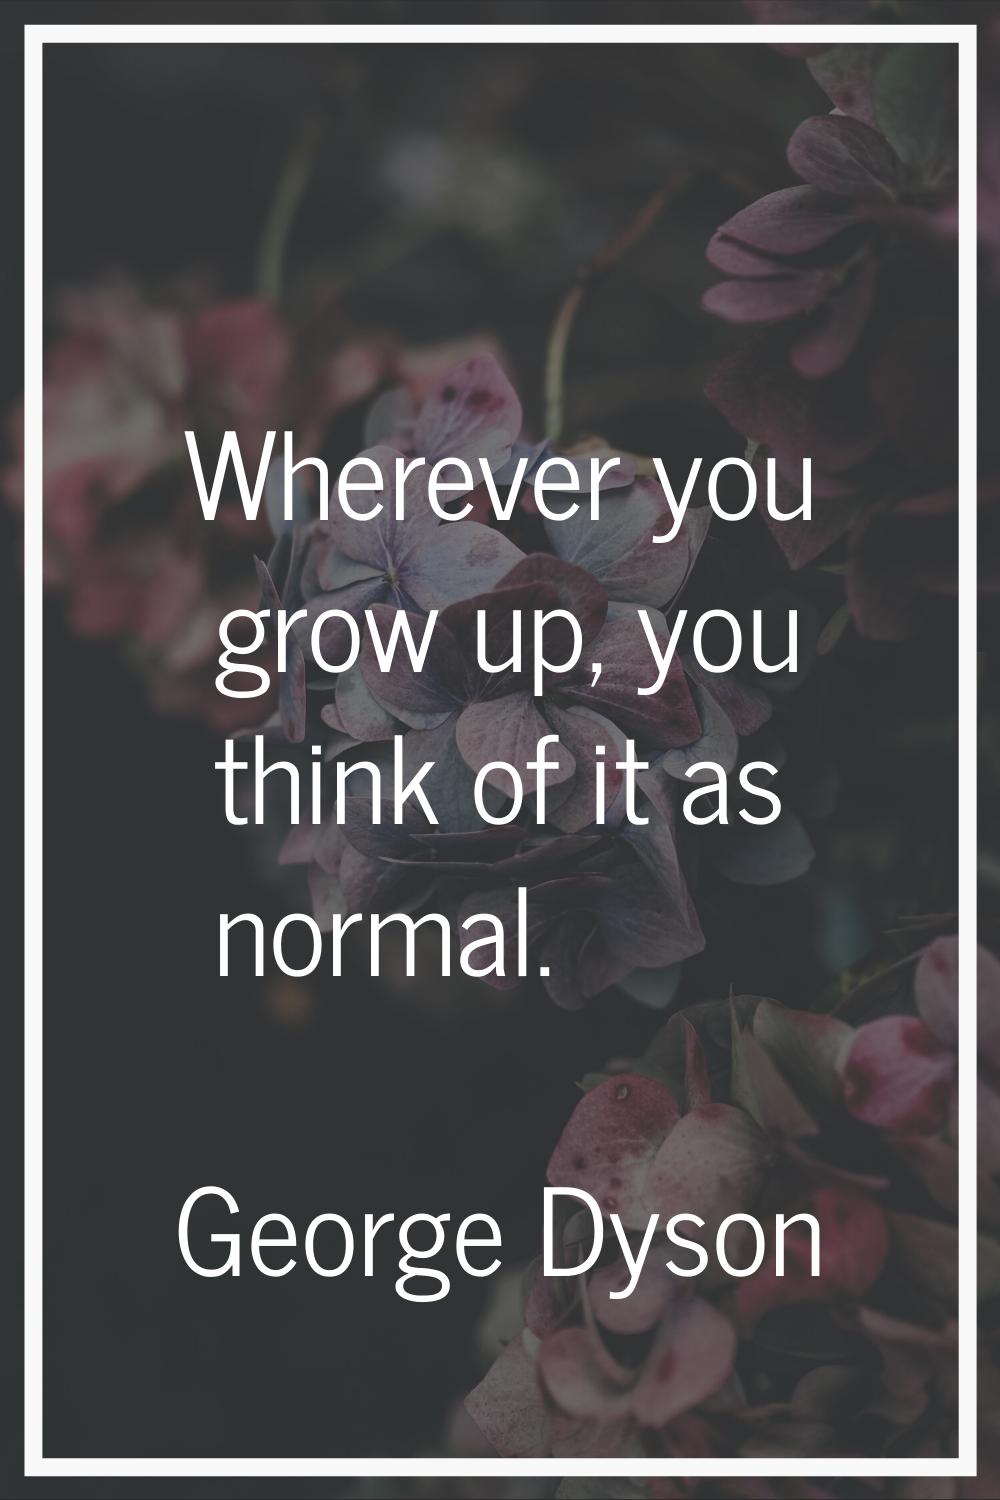 Wherever you grow up, you think of it as normal.